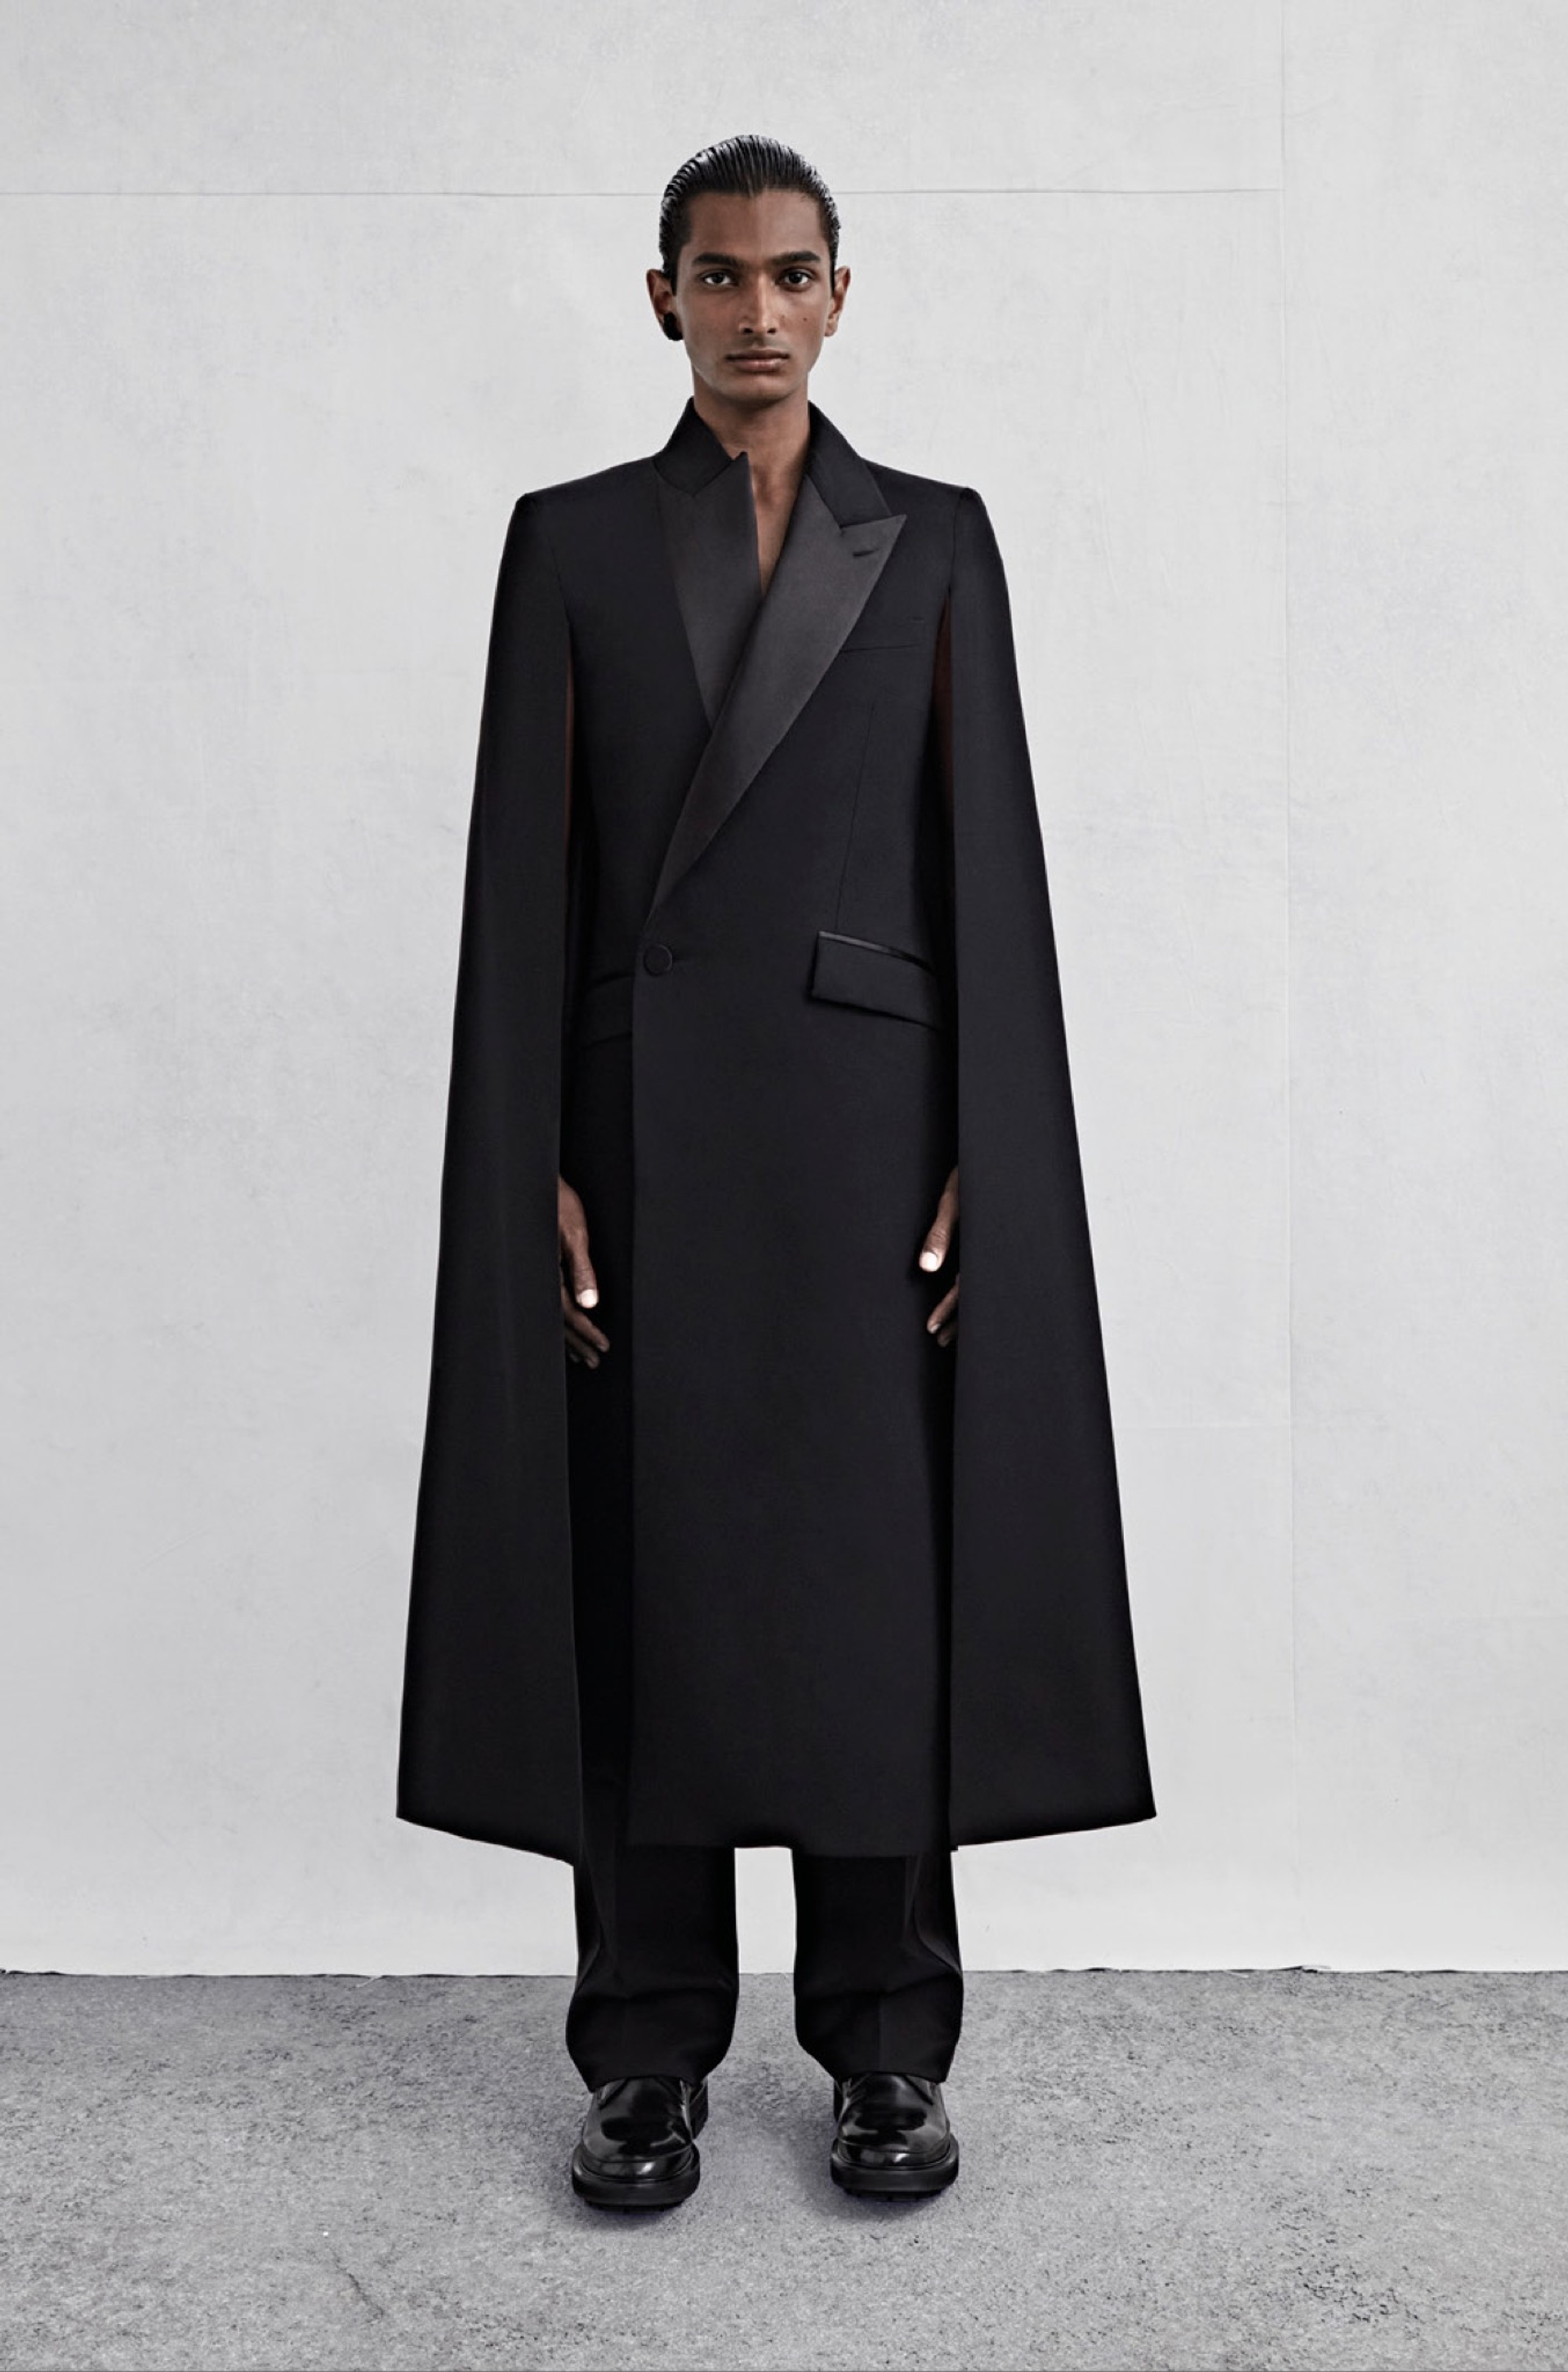 An asymmetric tailored cape coat in black barathea with tonal satin lapels and wide-legged trousers in black barathea with a tonal satin side stripe.